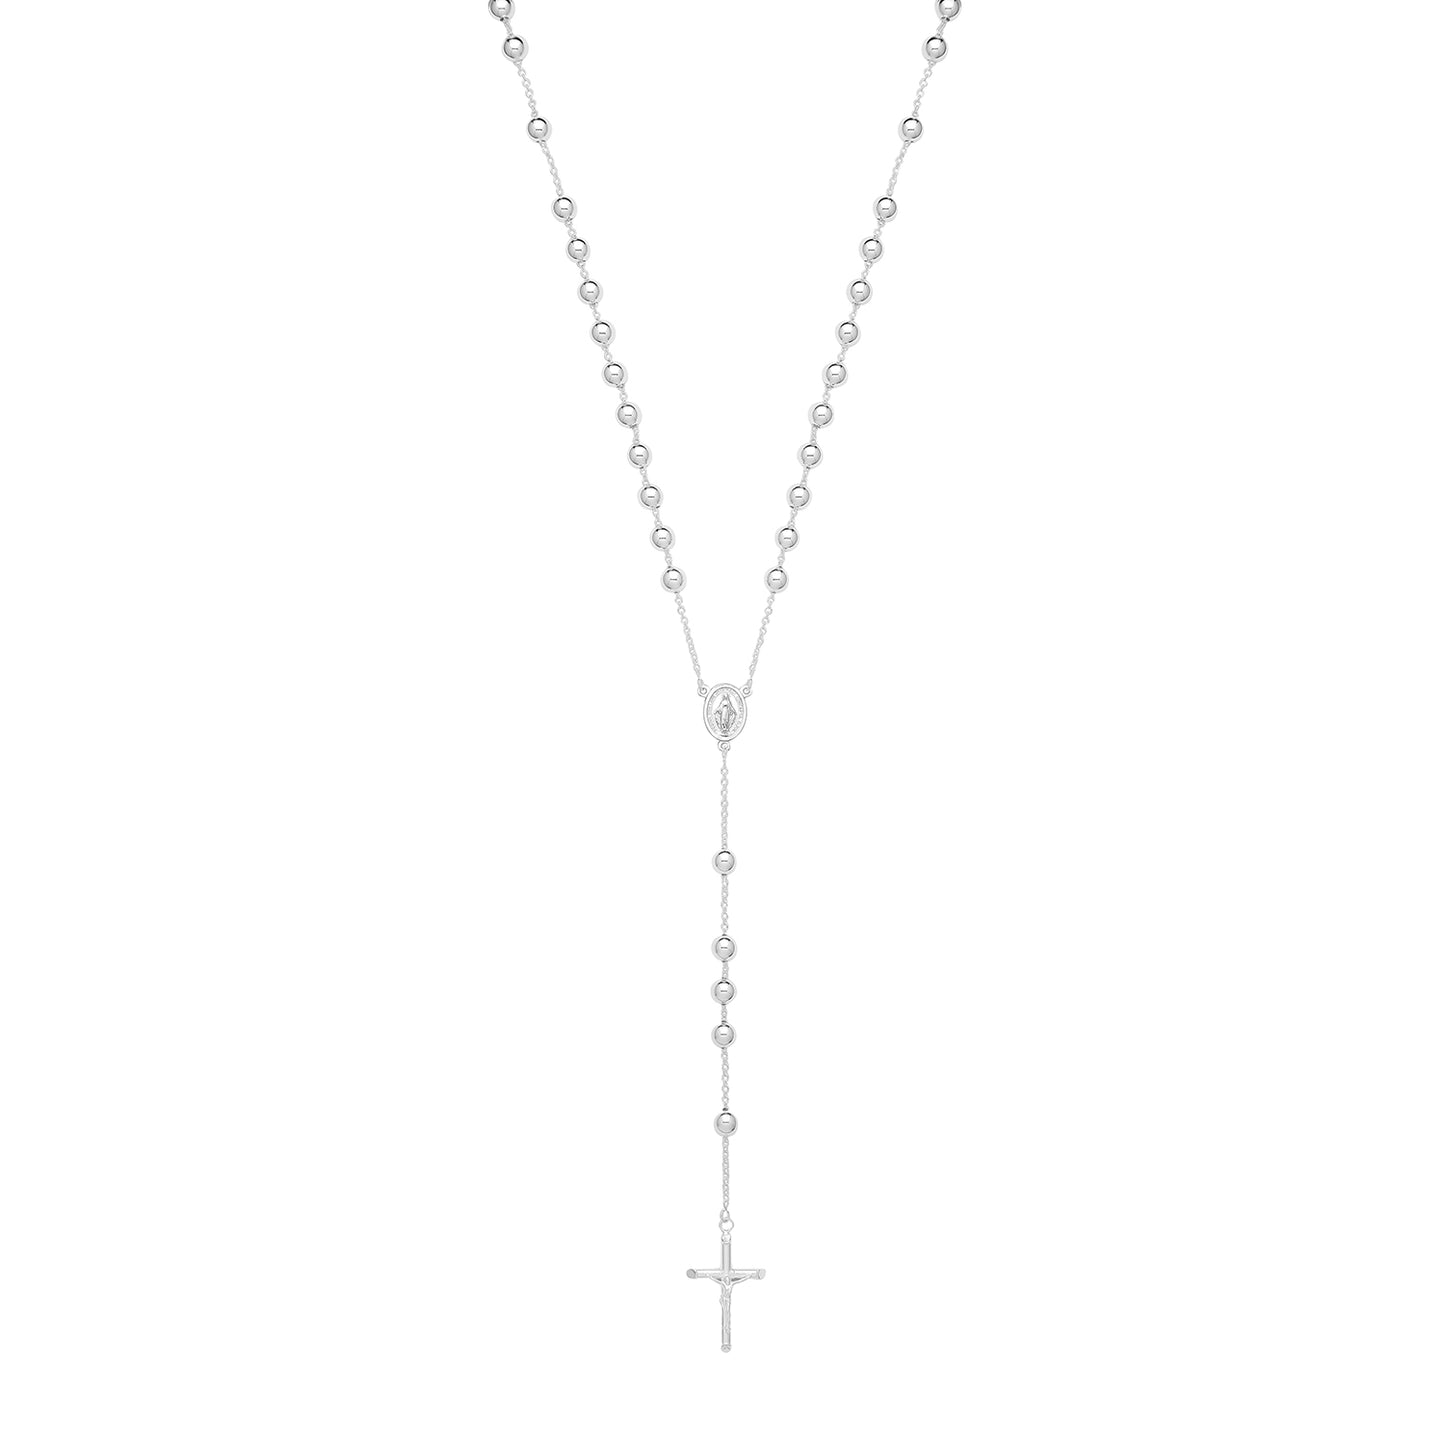 SILVER ROSARY BEAD NECKLET